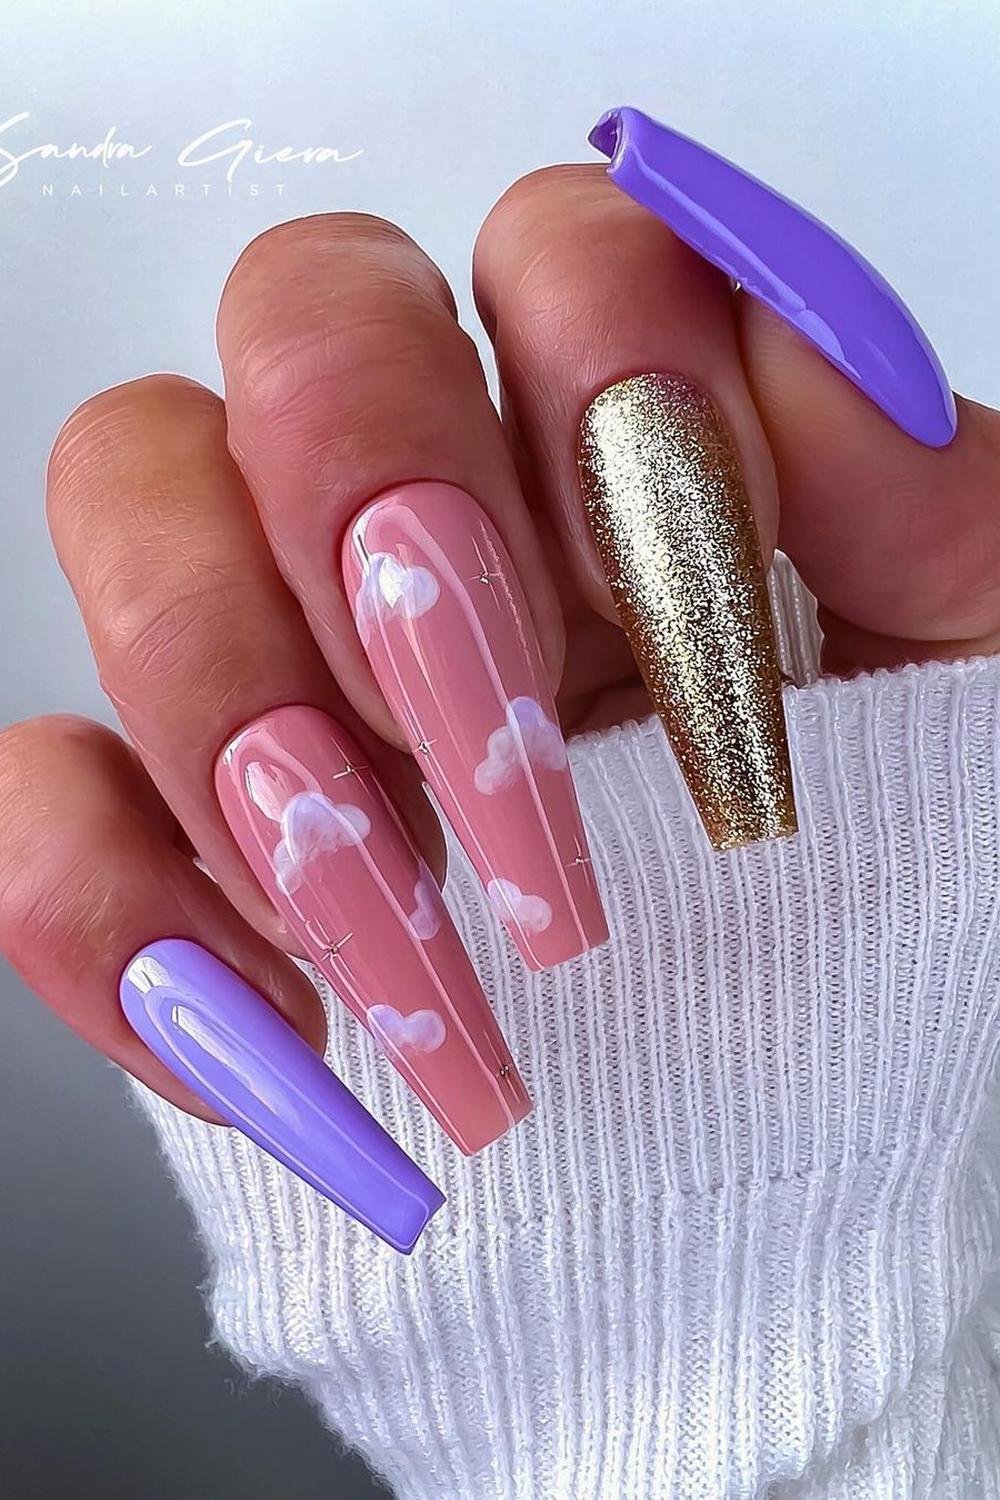 2 - Picture of Ballerina Nails